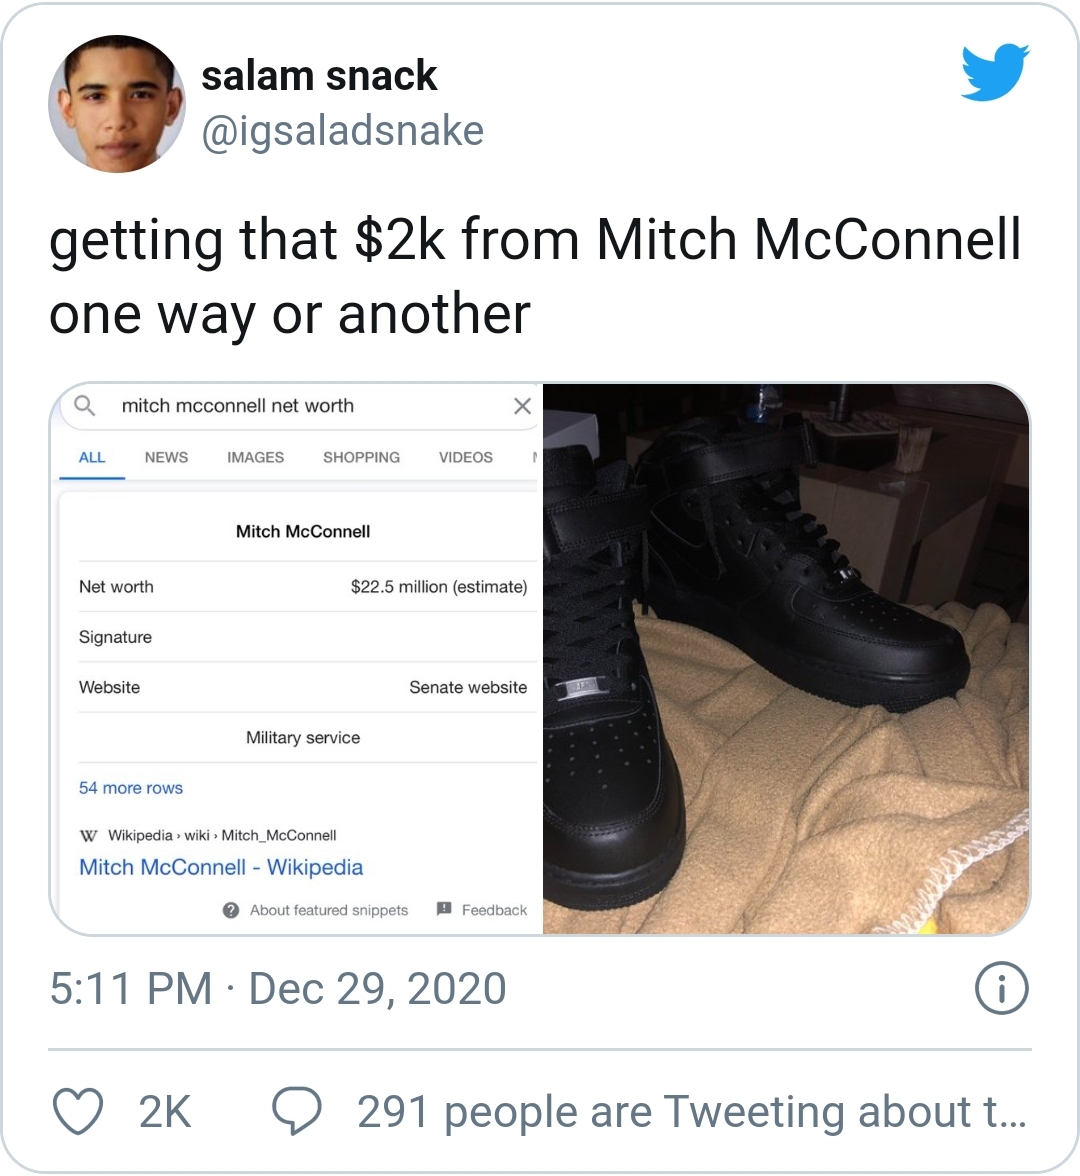 outdoor shoe - salam snack getting that $2k from Mitch McConnell one way or another mitch mcconnell net worth News Images Shopping All Videos Milch McConnell Net worth $22.5 milion estimate Signature Website Senate website Mitary service 54 more rows Mitc